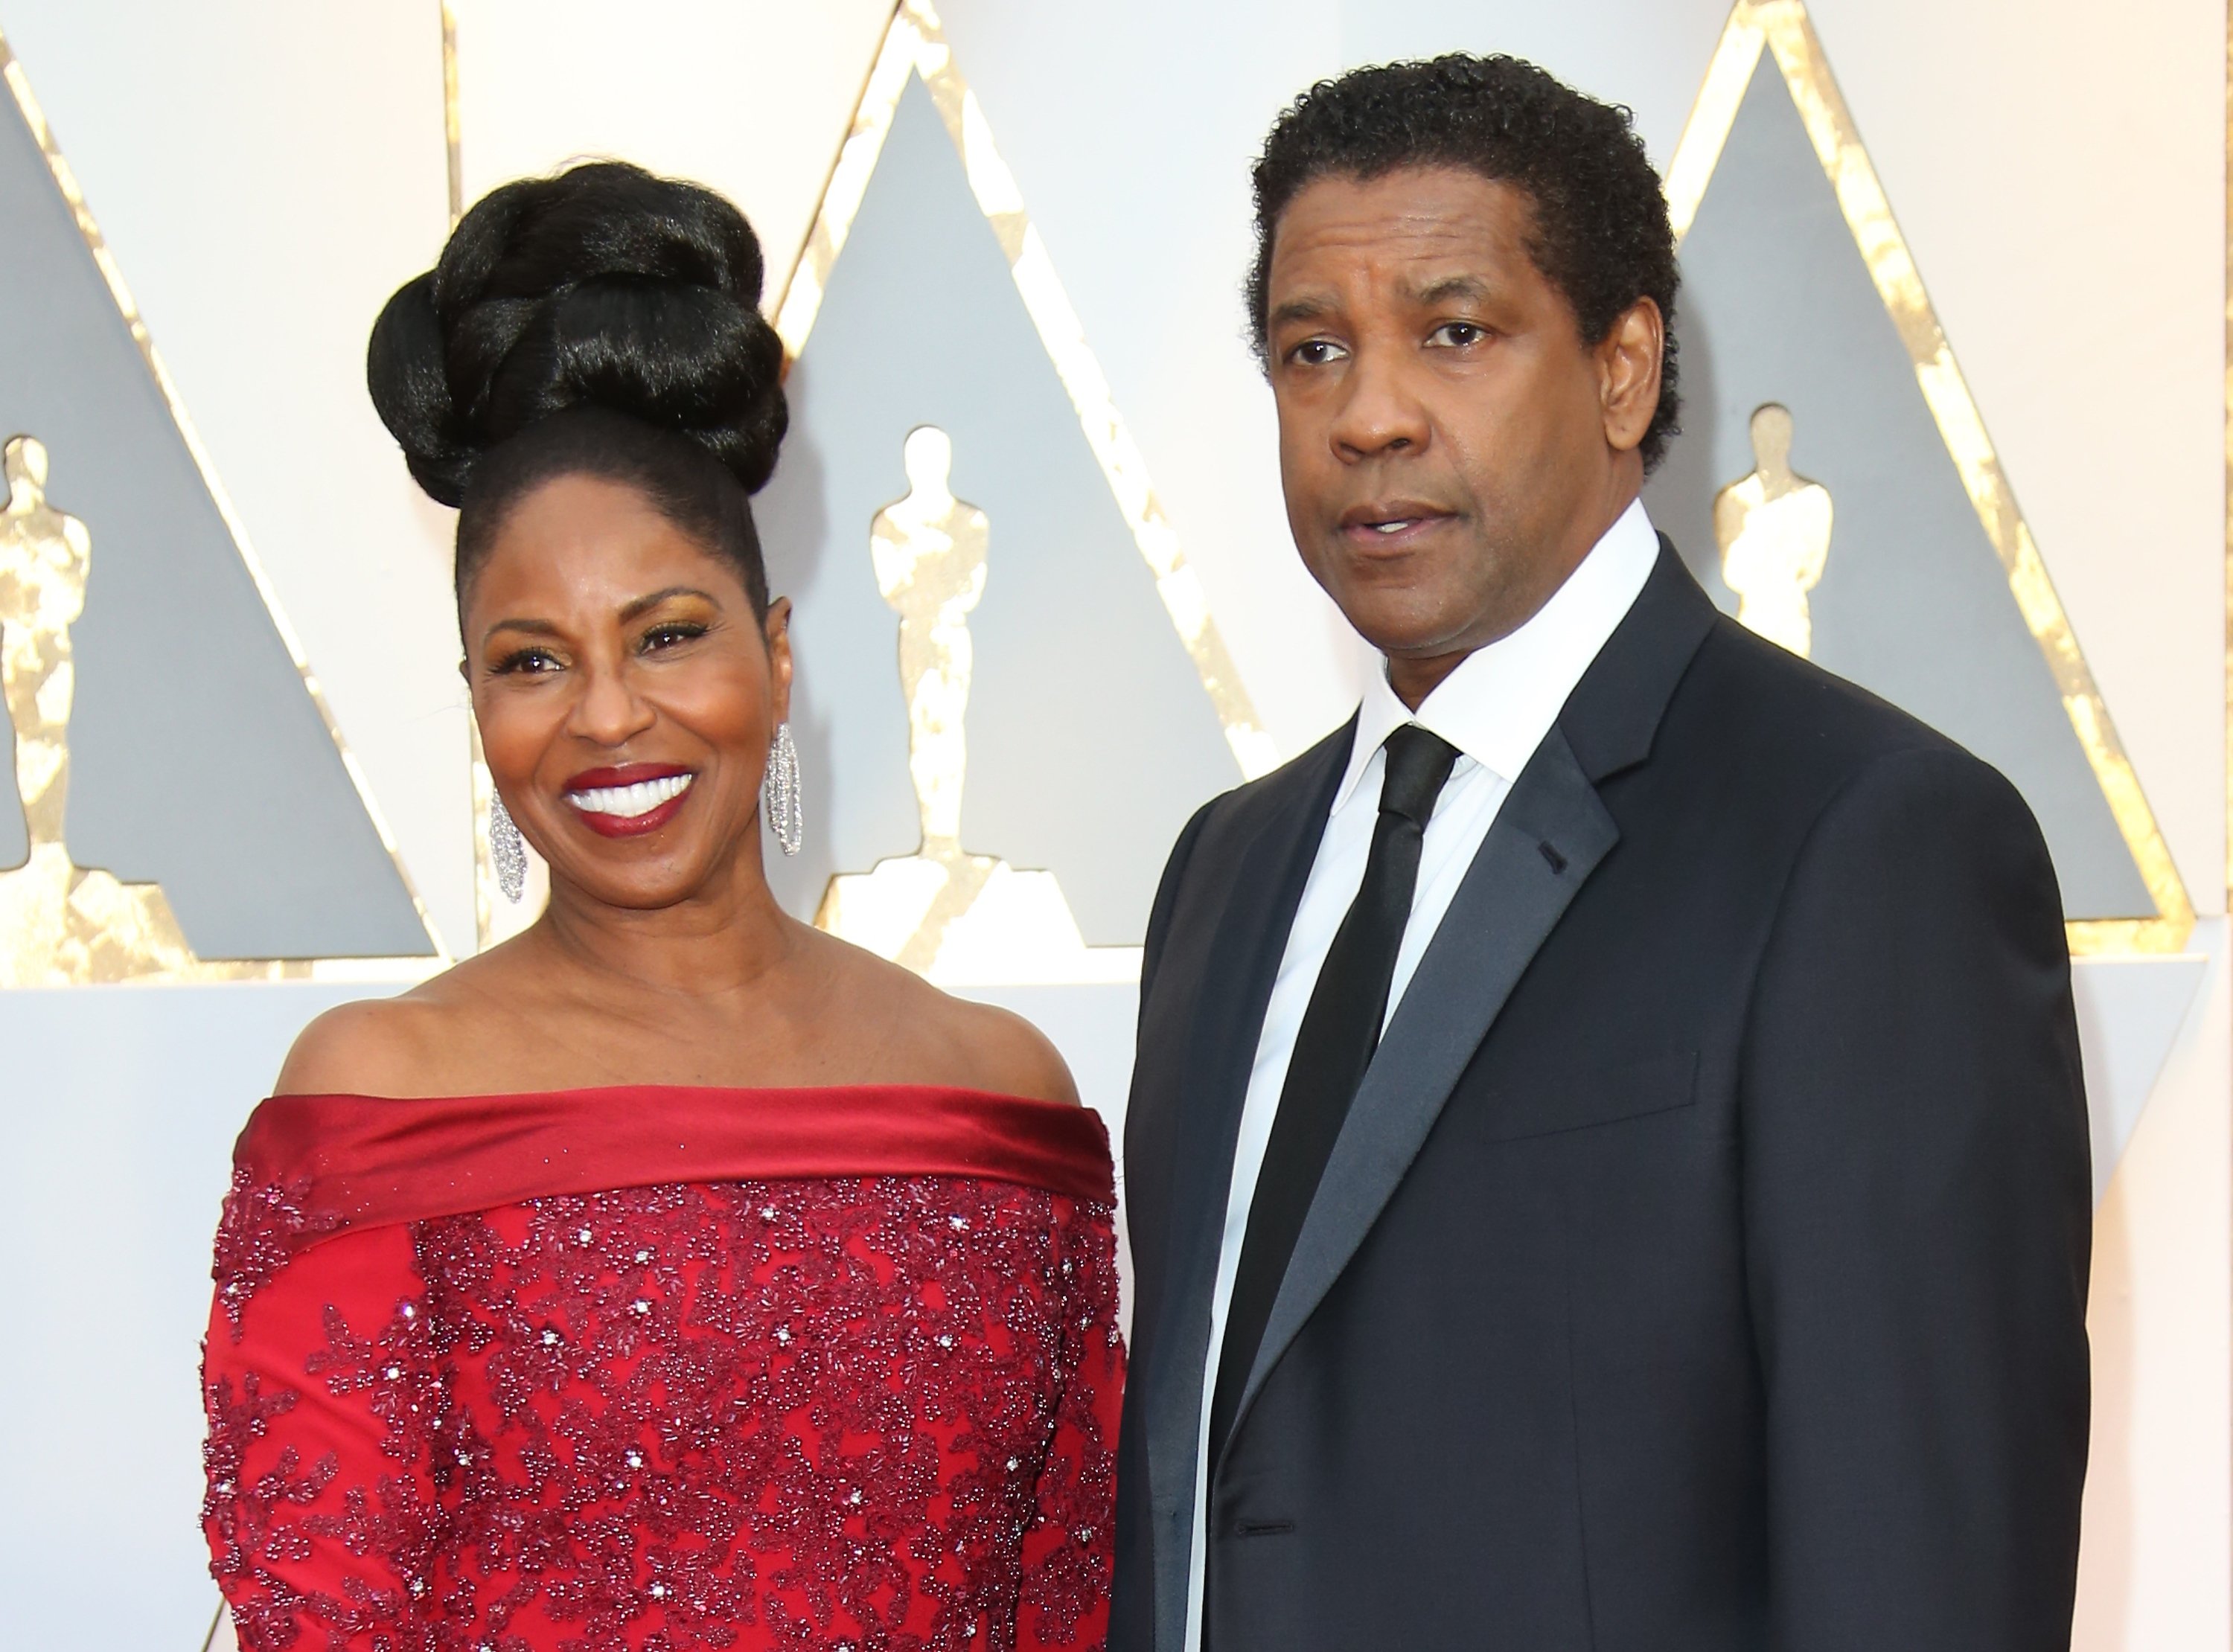 Denzel Washington and Pauletta Washington during the 89th Annual Academy Awards at Hollywood & Highland Center on February 26, 2017 in Hollywood, California. | Source: Getty Images